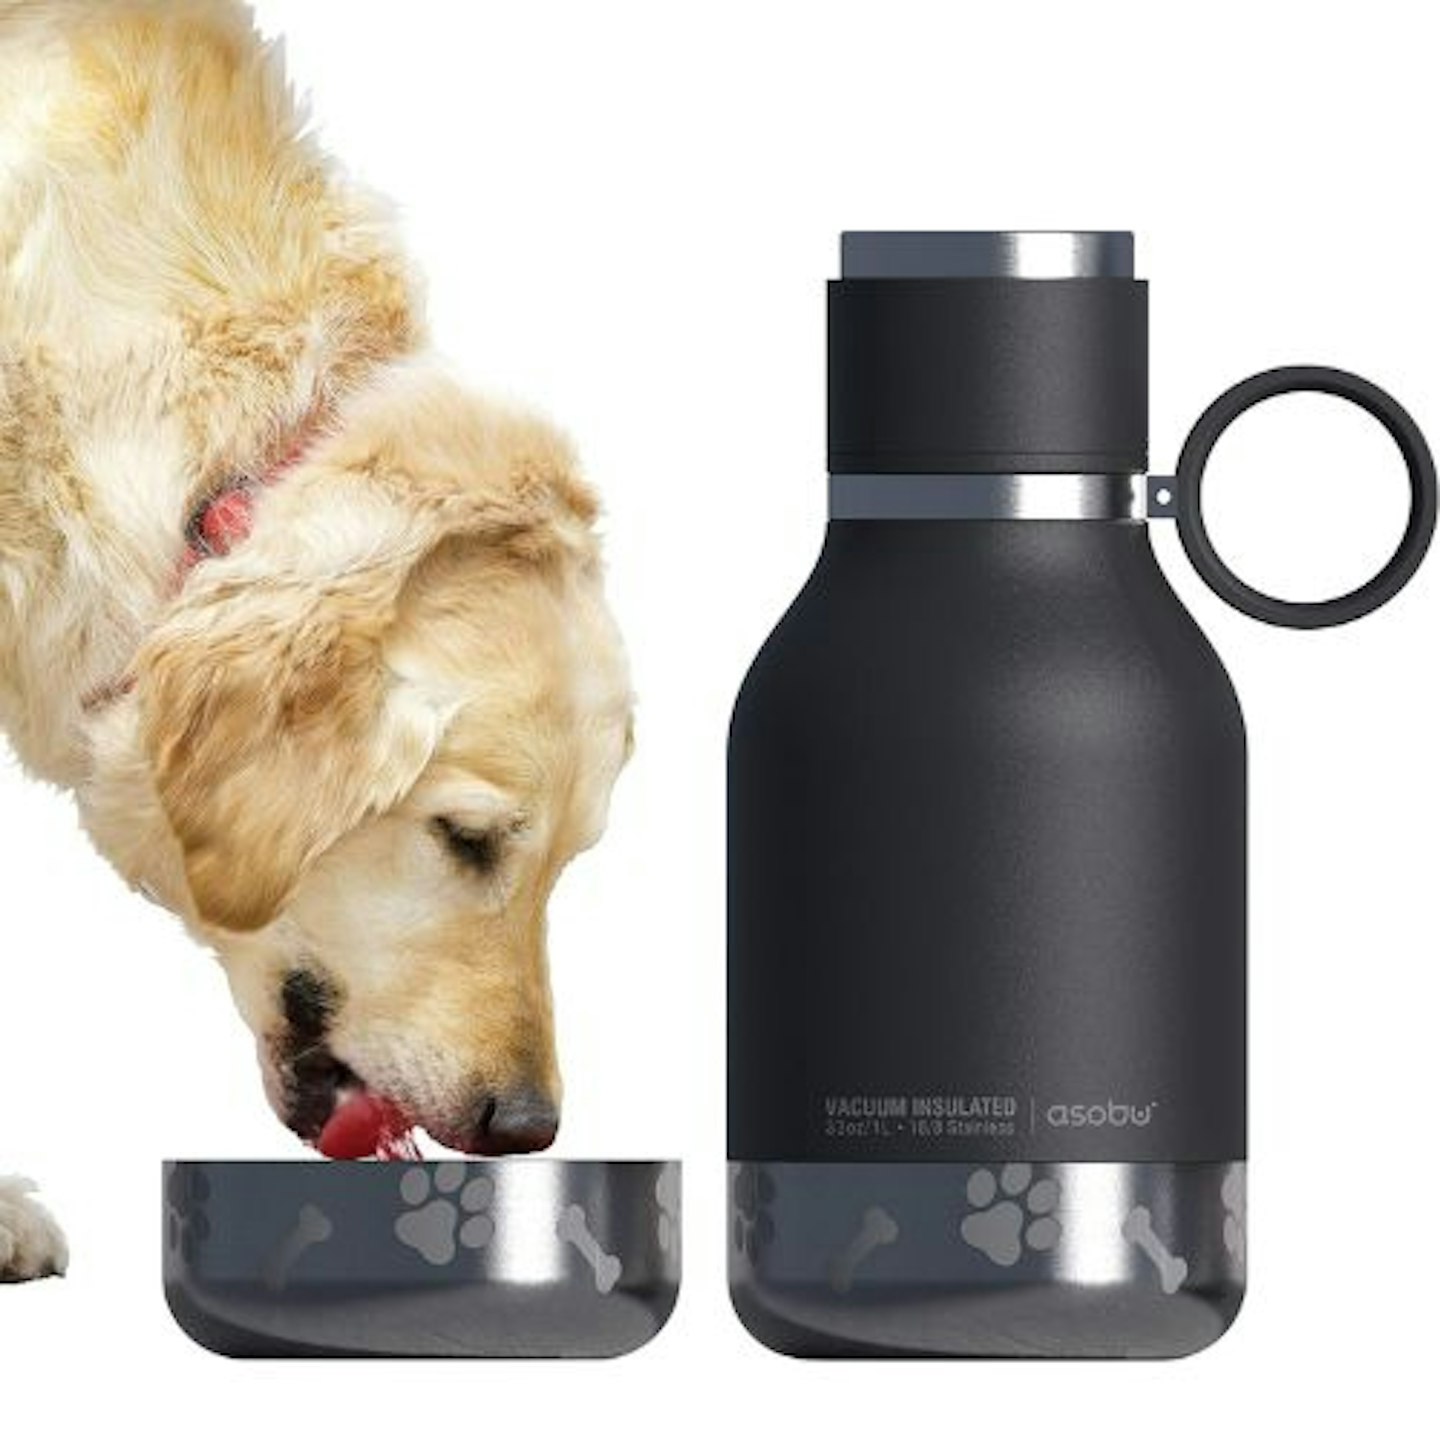 Absobu Dog Stainless Steel Insulated Water Bottle and Bowl